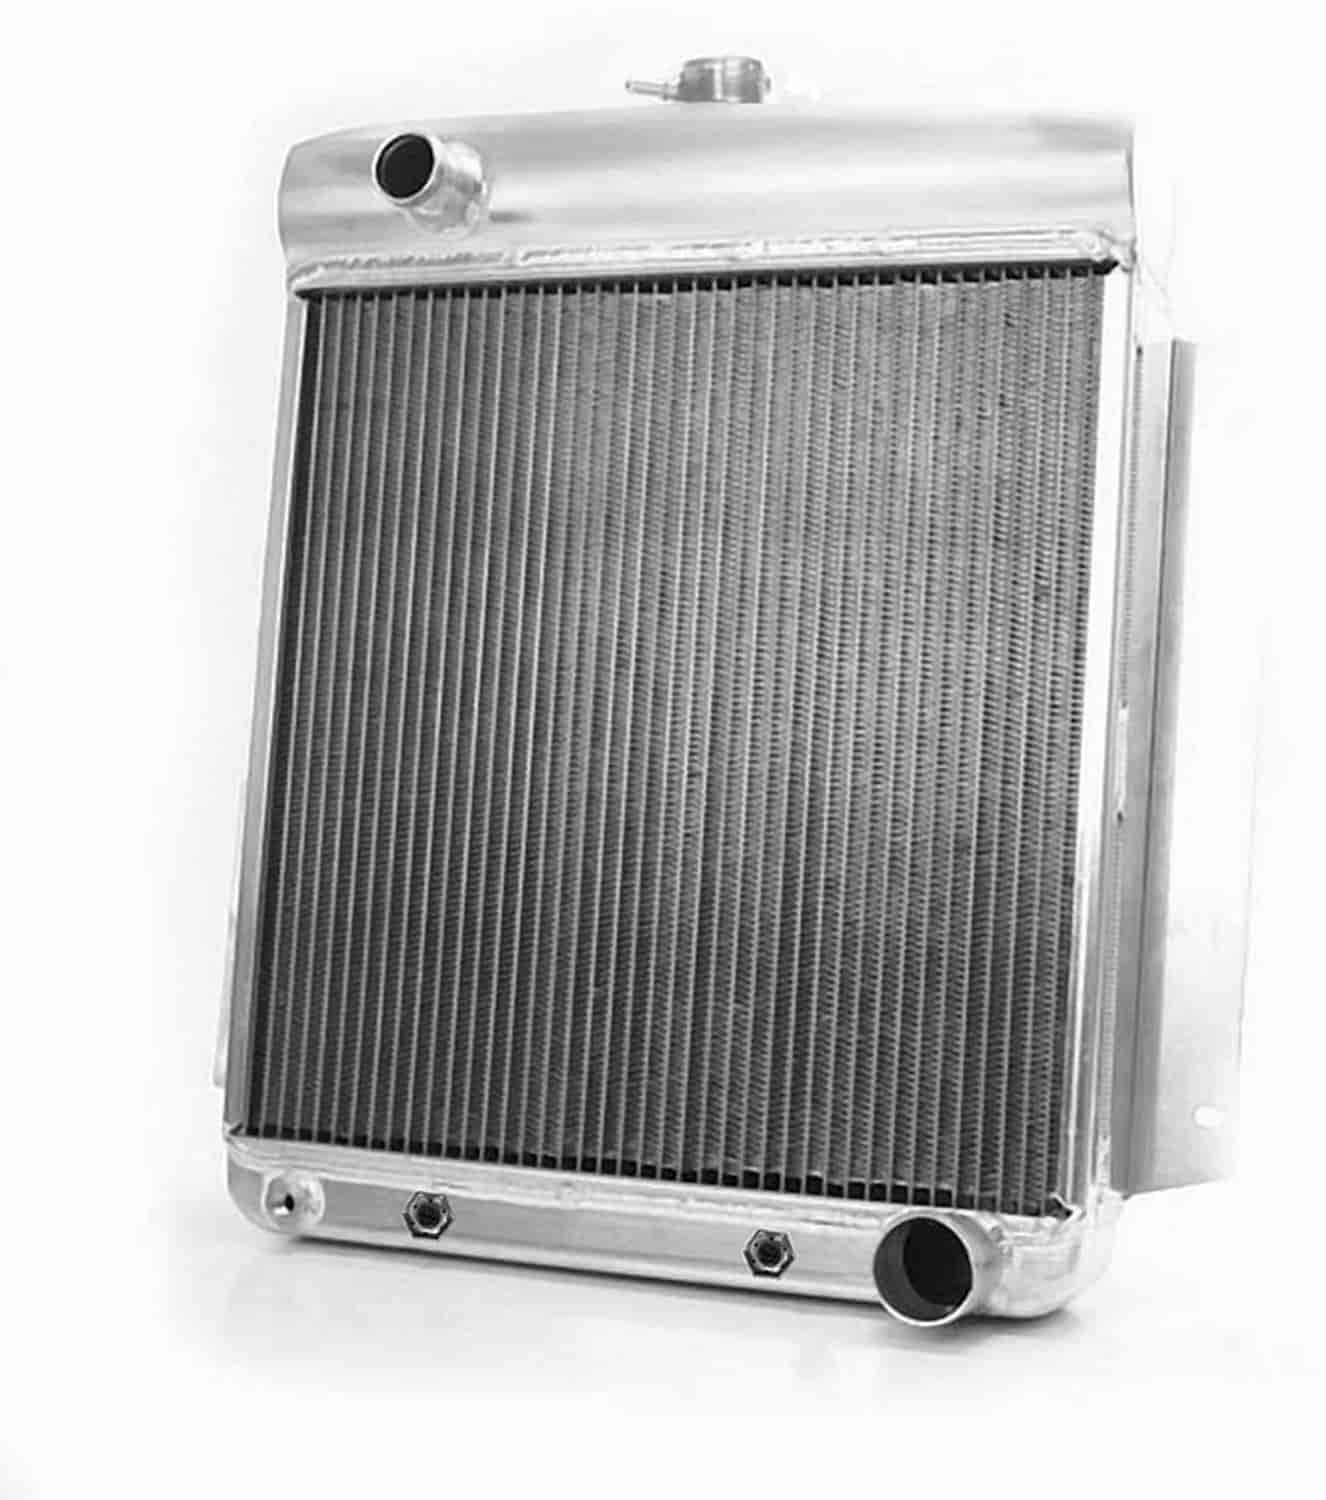 ExactFit Radiator for 1954-1956 Fairlane with Late Ford